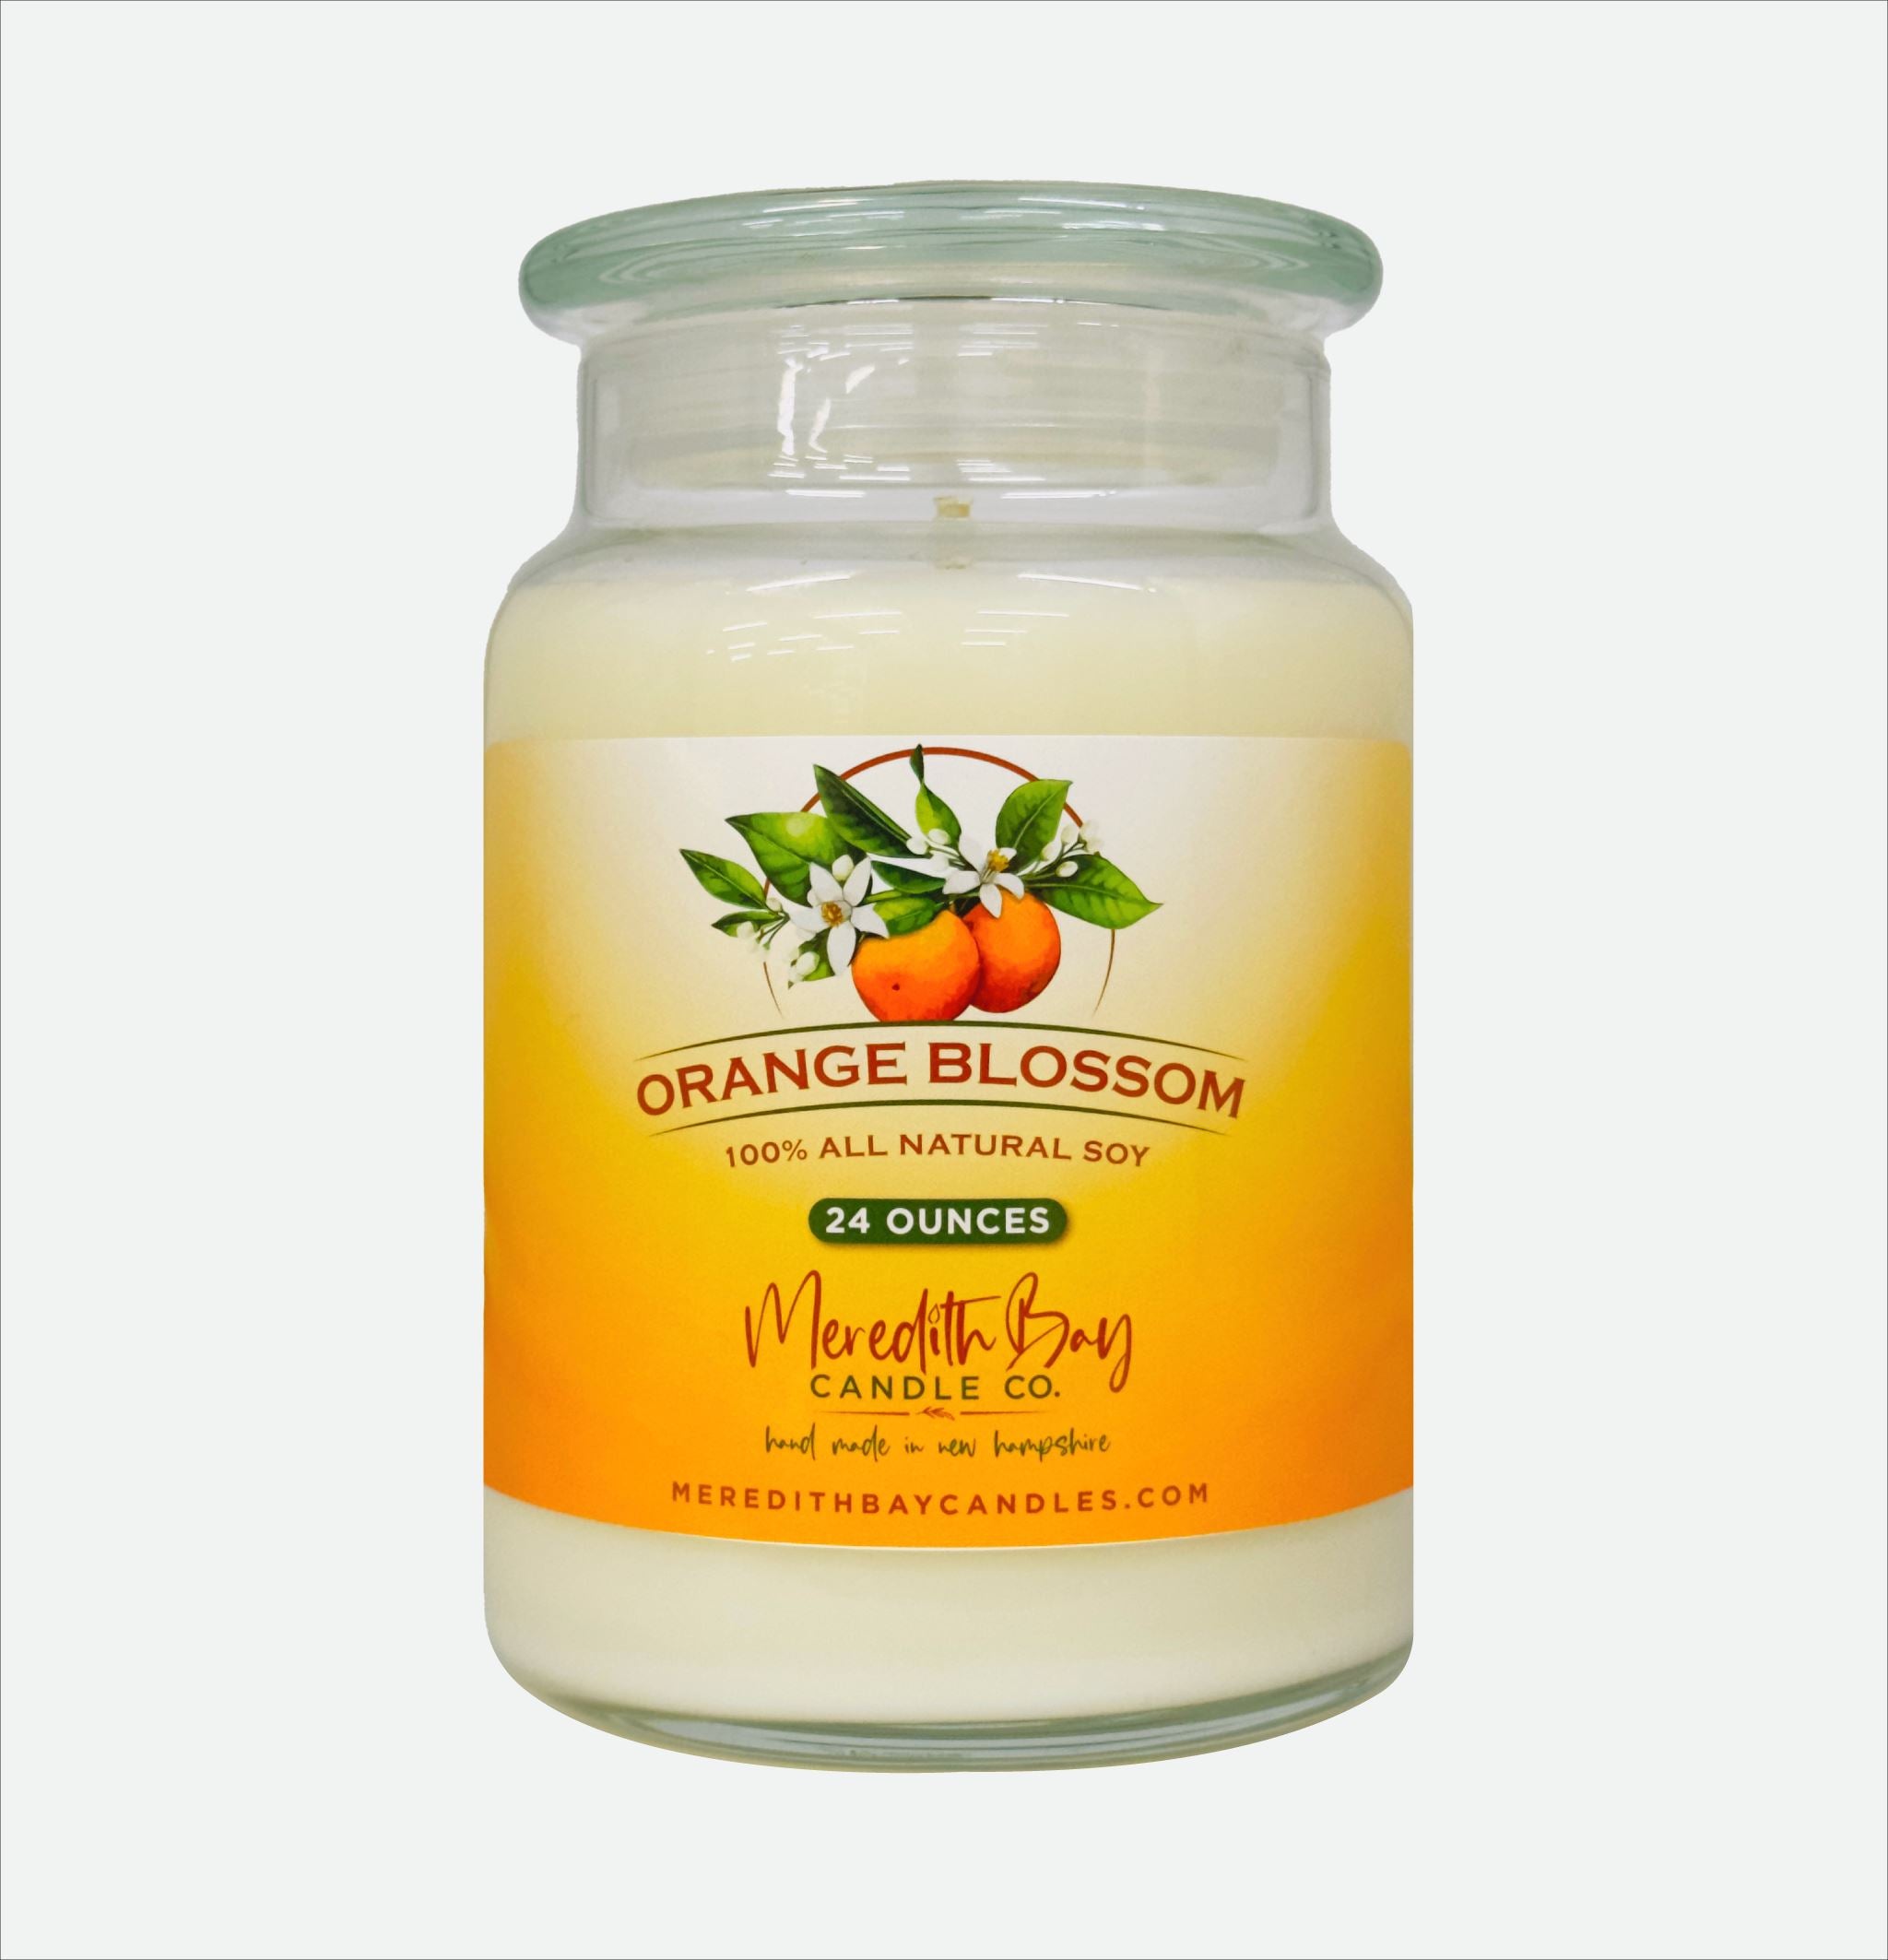 Orange Blossom Soy Candle Meredith Bay Candle Co 24 Oz 